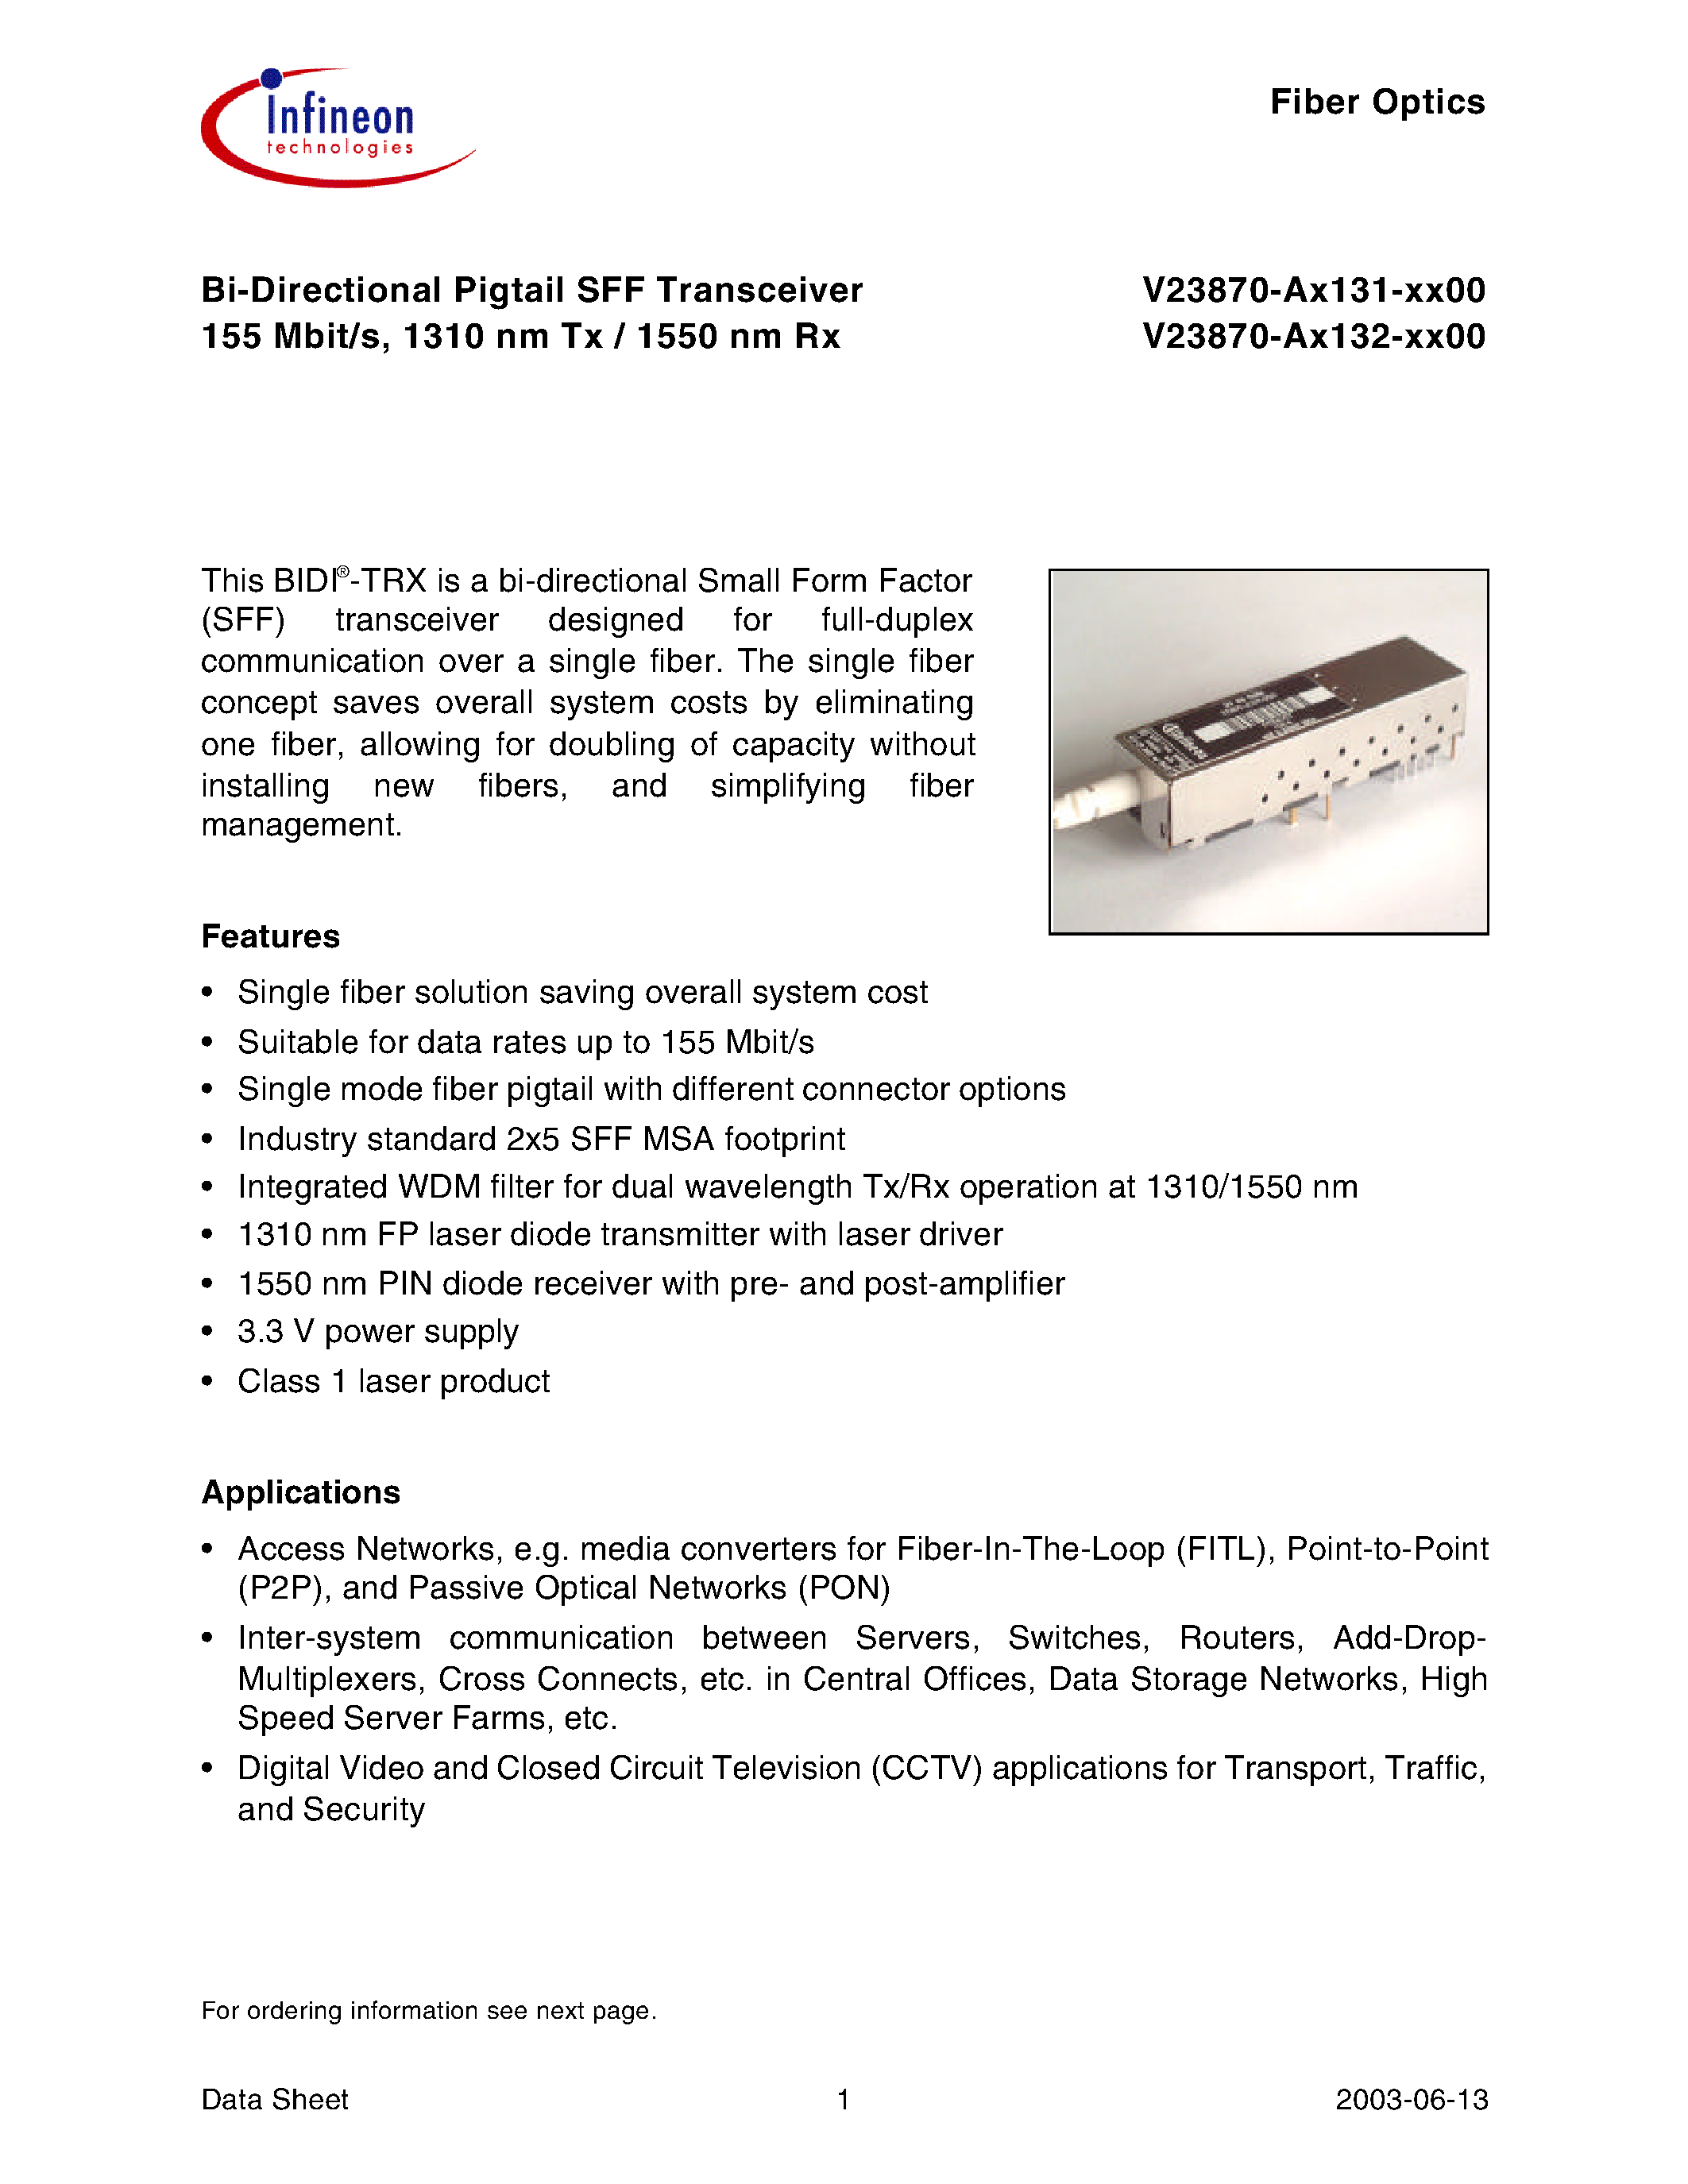 Datasheet V23870-A3131-C100 - Bi-Directional Pigtail SFF Transceiver 155 Mbit/s/ 1310 nm Tx / 1550 nm Rx page 1